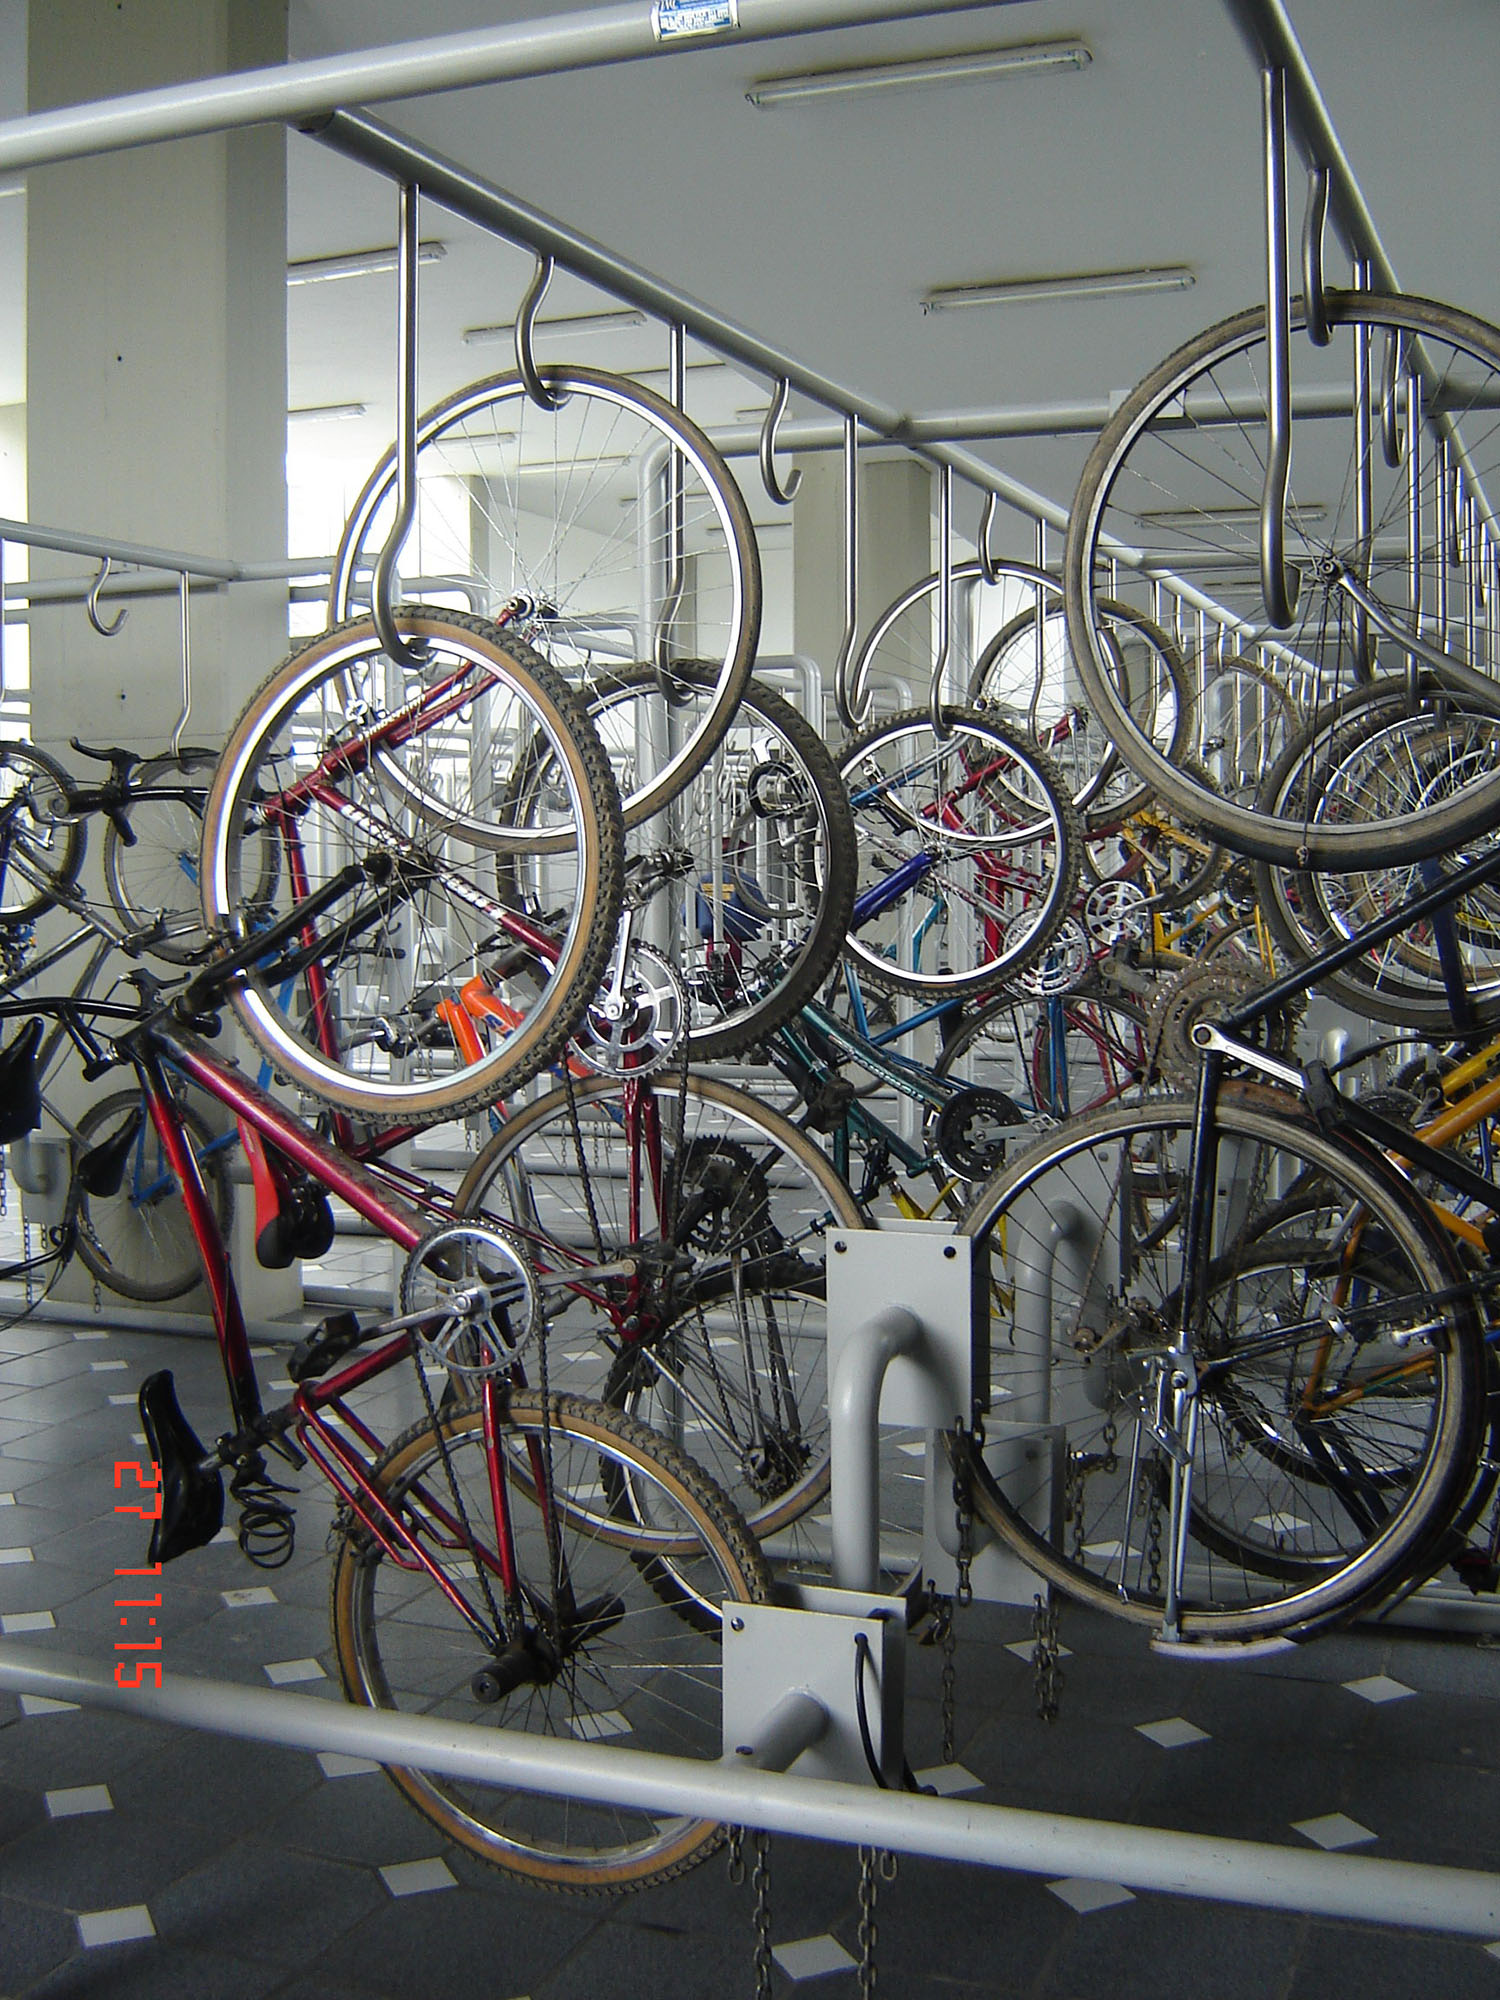 Fig. 31.33 Upright bicycle parking at TransMilenio stations in Bogotá saves space, but can be difficult for some to use.